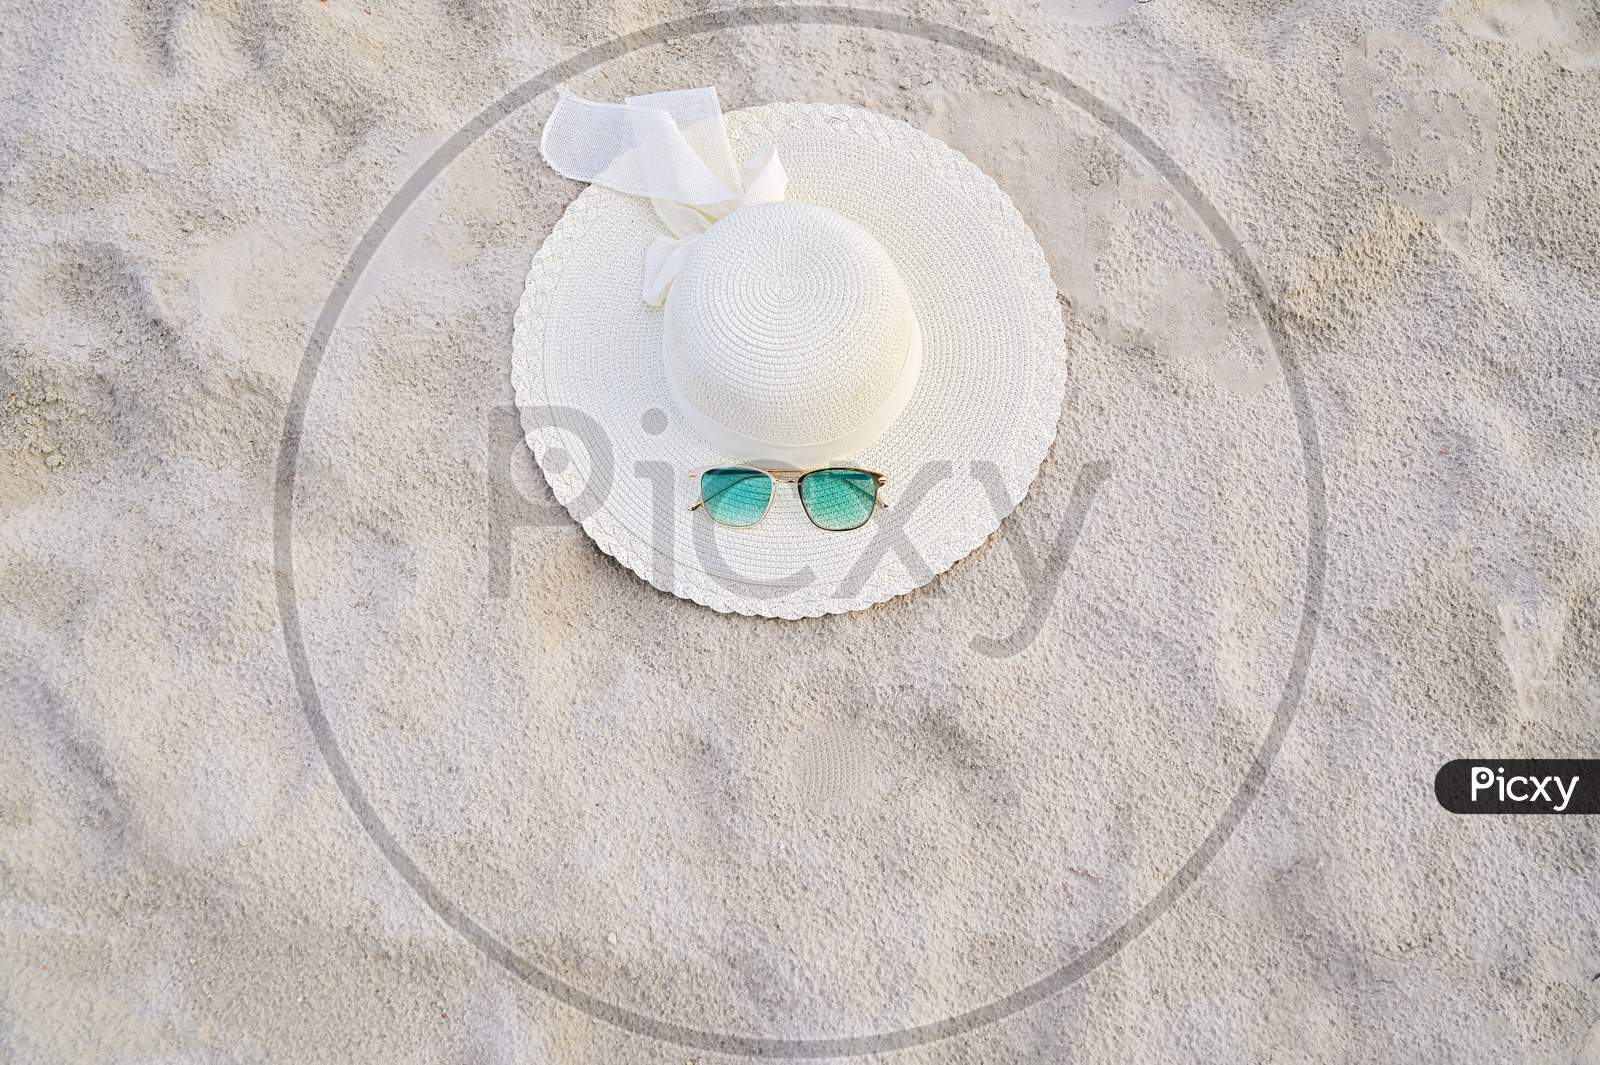 Hats And Glasses Are Located On The Sea Blue Sea Beaches On A Clear Day